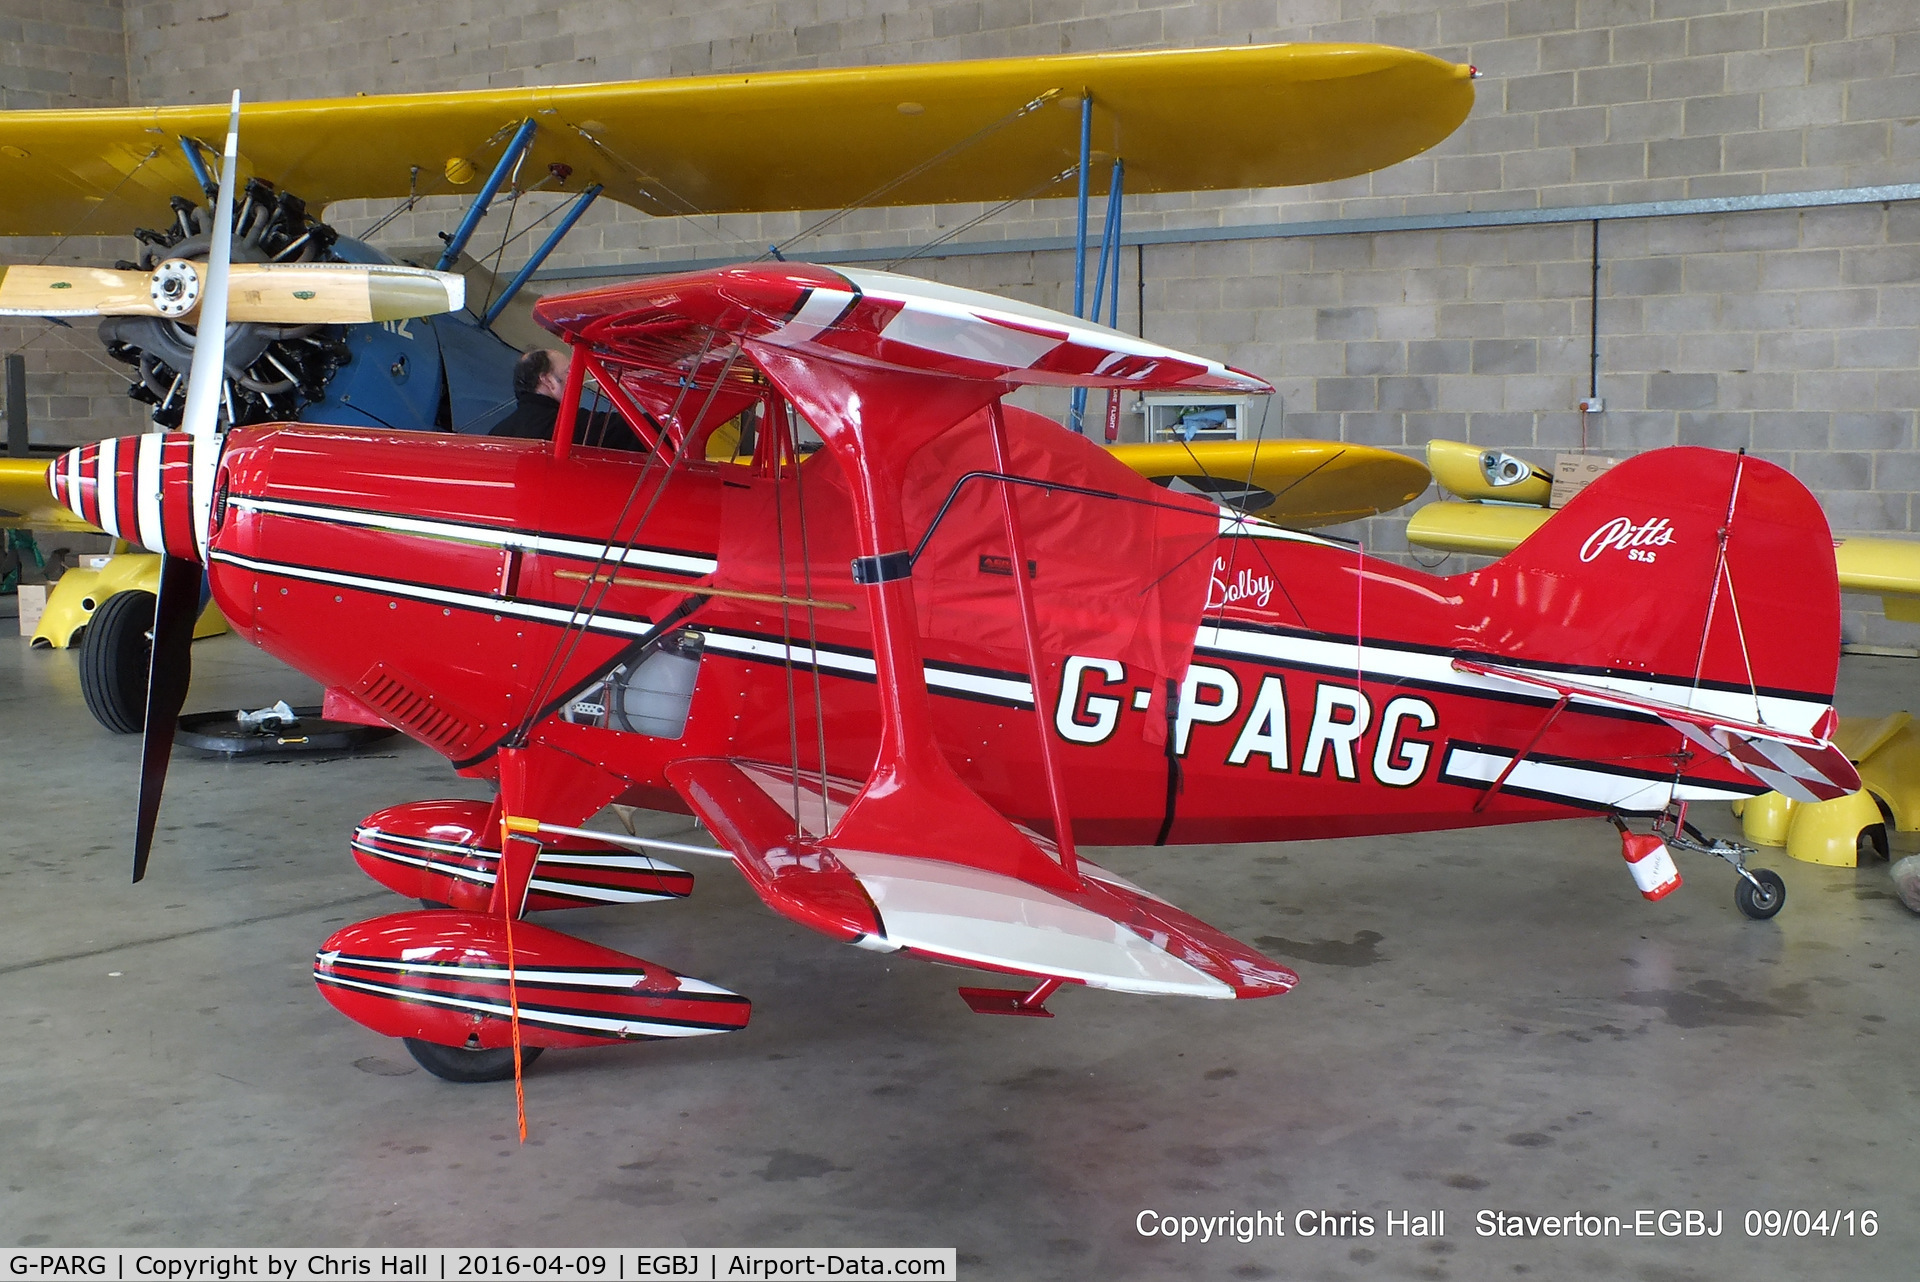 G-PARG, 1971 Pitts S-1S Special C/N 19528-1, Staverton resident